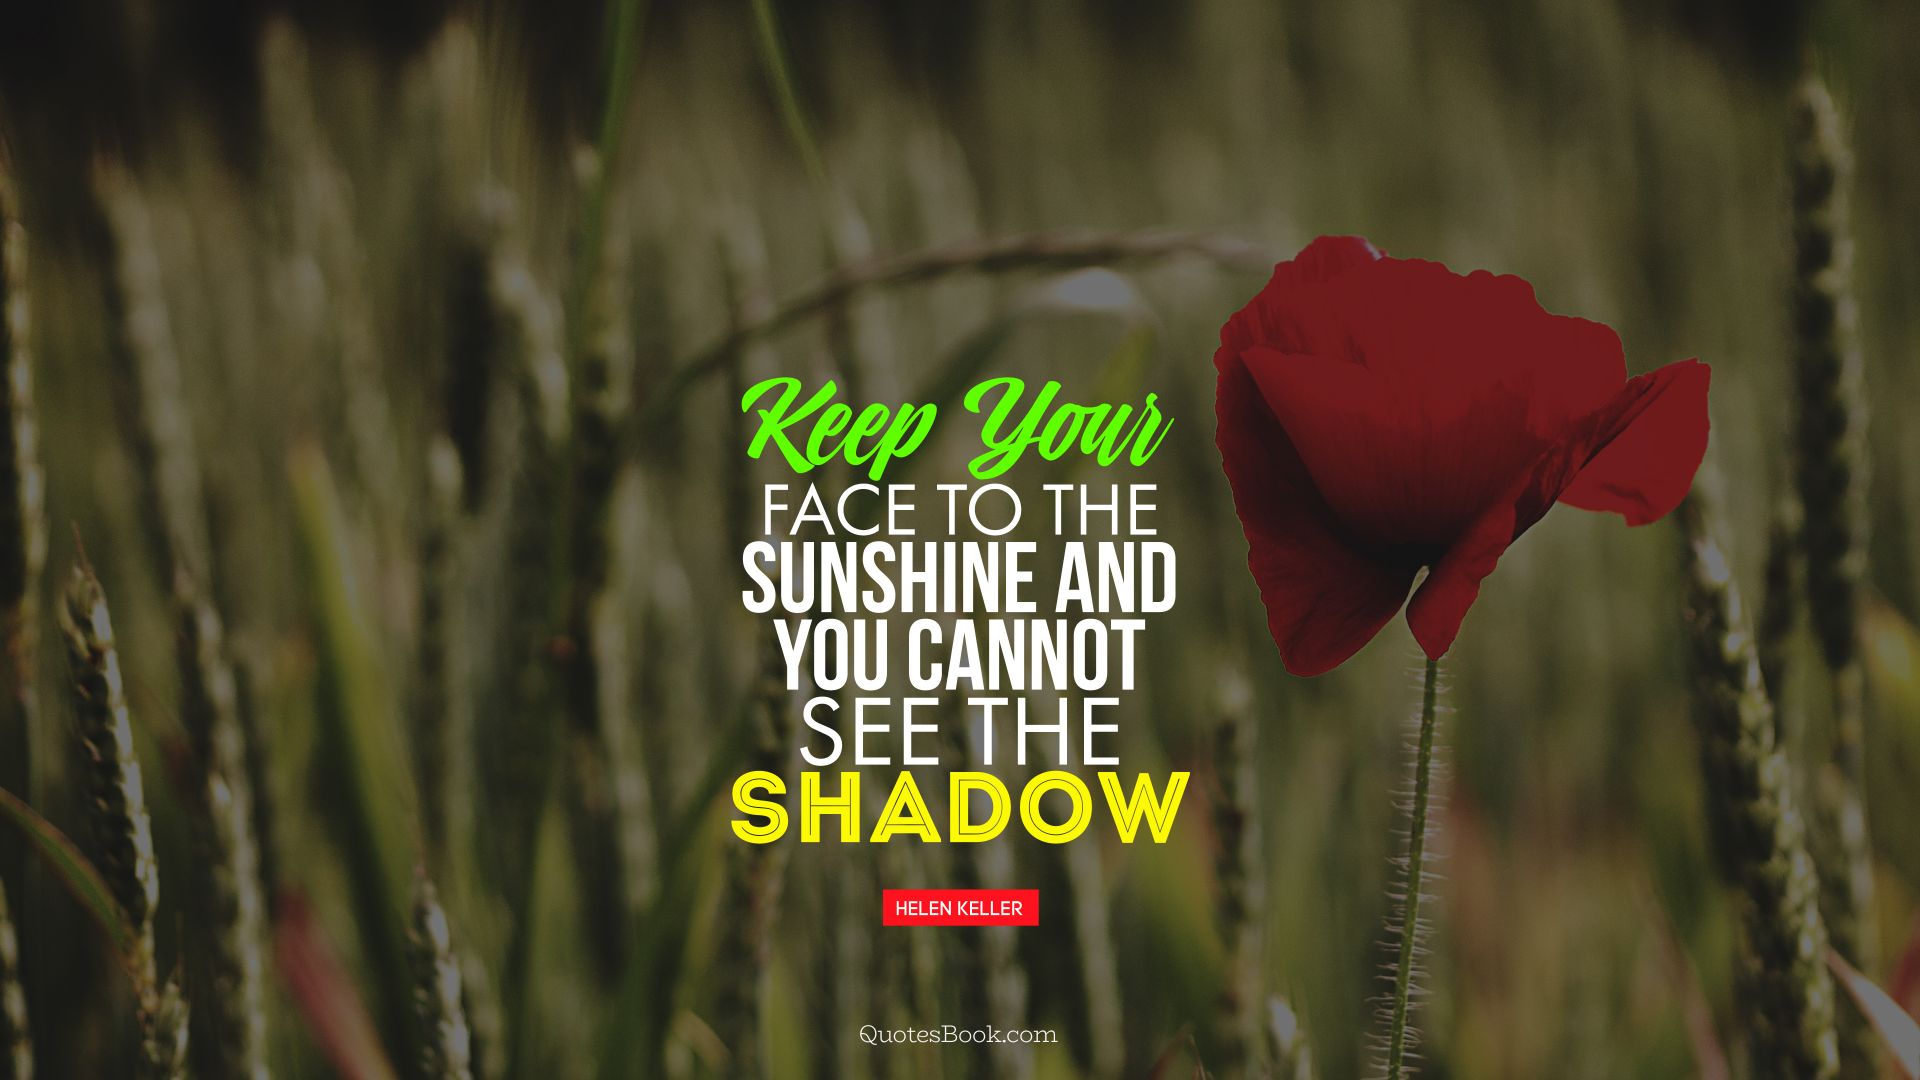 Keep your face to the sunshine and you cannot see the shadow. - Quote by Helen Keller